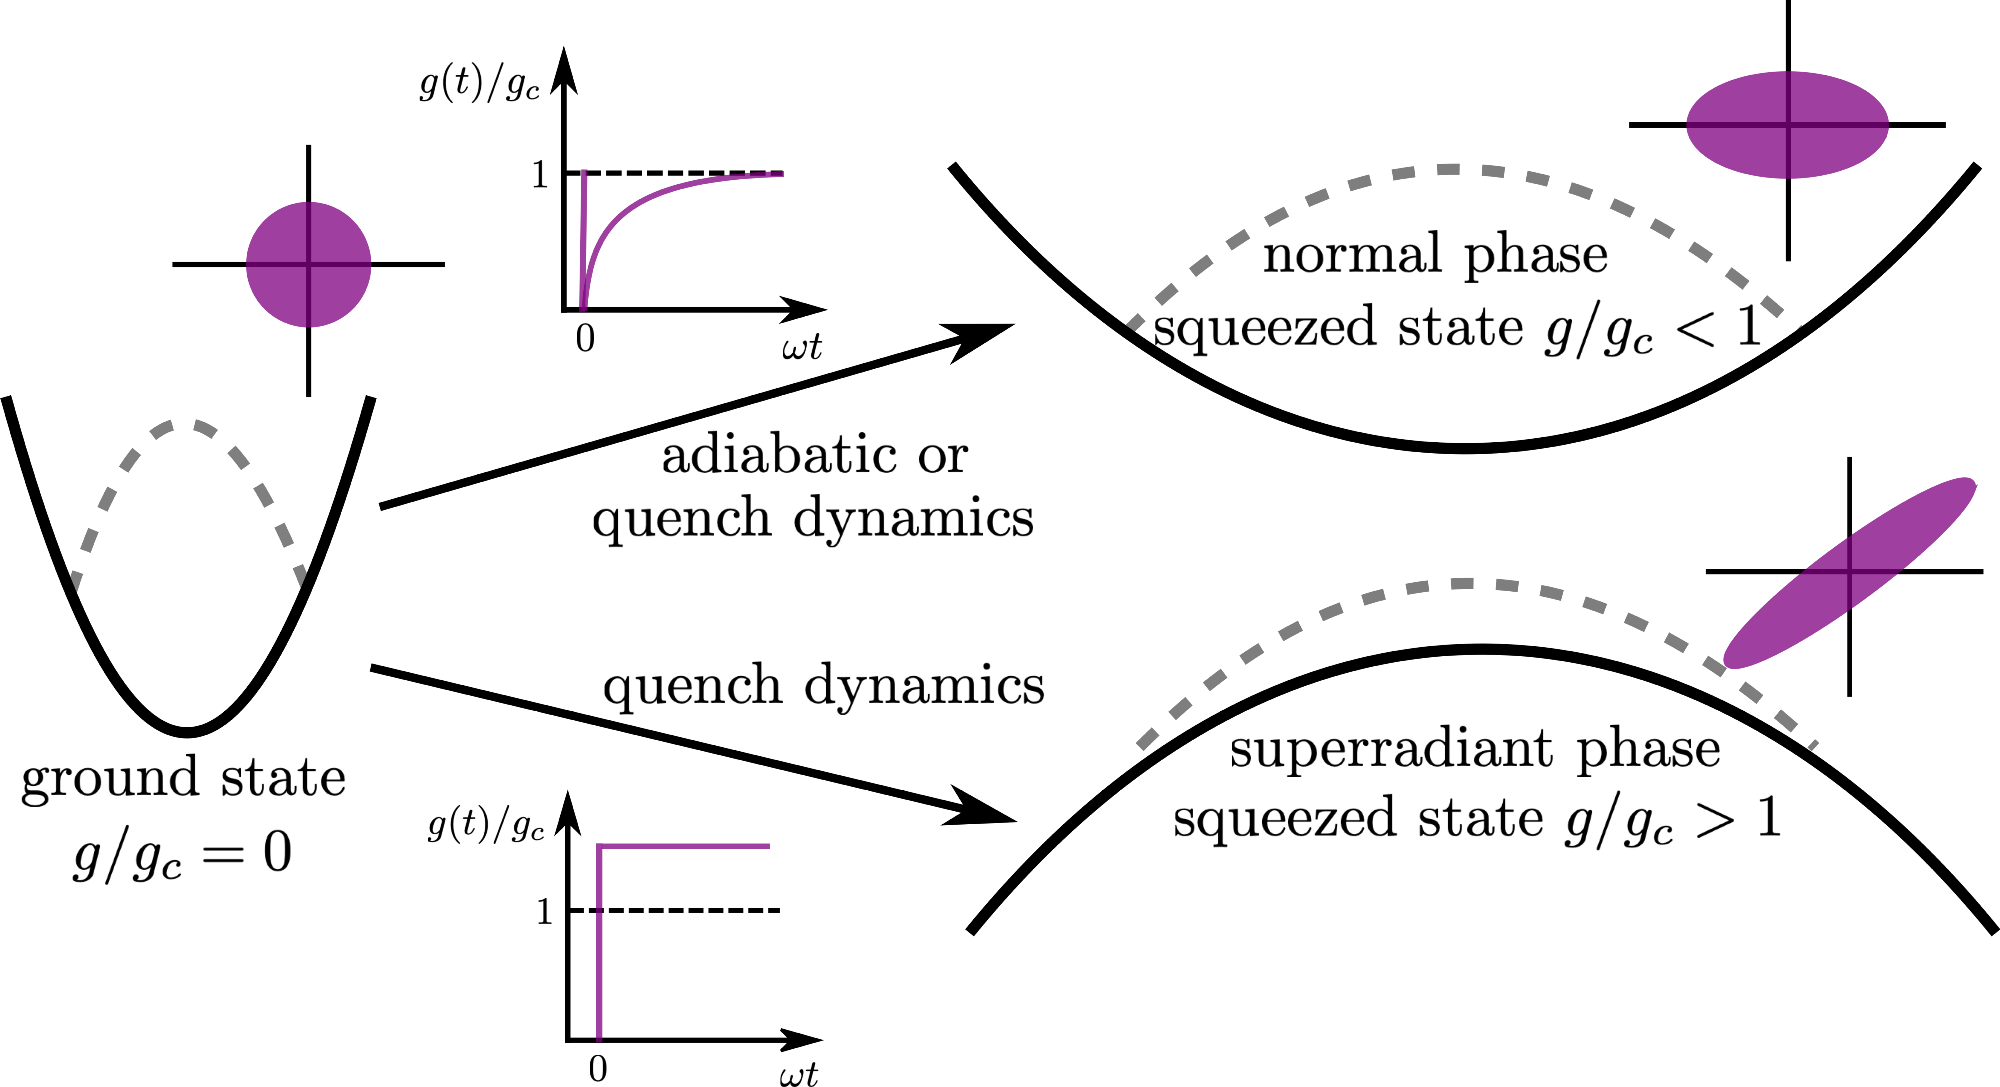 The schematic represents a toy model for a quantum phase transition (g/gc > 1 is the superradiant phase), with the black line being the effective potential that is felt by a quantum state (dashed-gray line). Driving the system close to the critical point (g/gc ~ 1) creates the correlated (squeezed) excitations at a very slow rate (critical slowing down), since the effective potential is still of trapping form. However, if the system is quenched beyond the critical point (g/gc > 1), the same number of correlated excitations can be generated much faster since the initial state will behave as if it was placed in an inverted harmonic oscillator potential. The purple ellipses represent the phase space picture of the state.